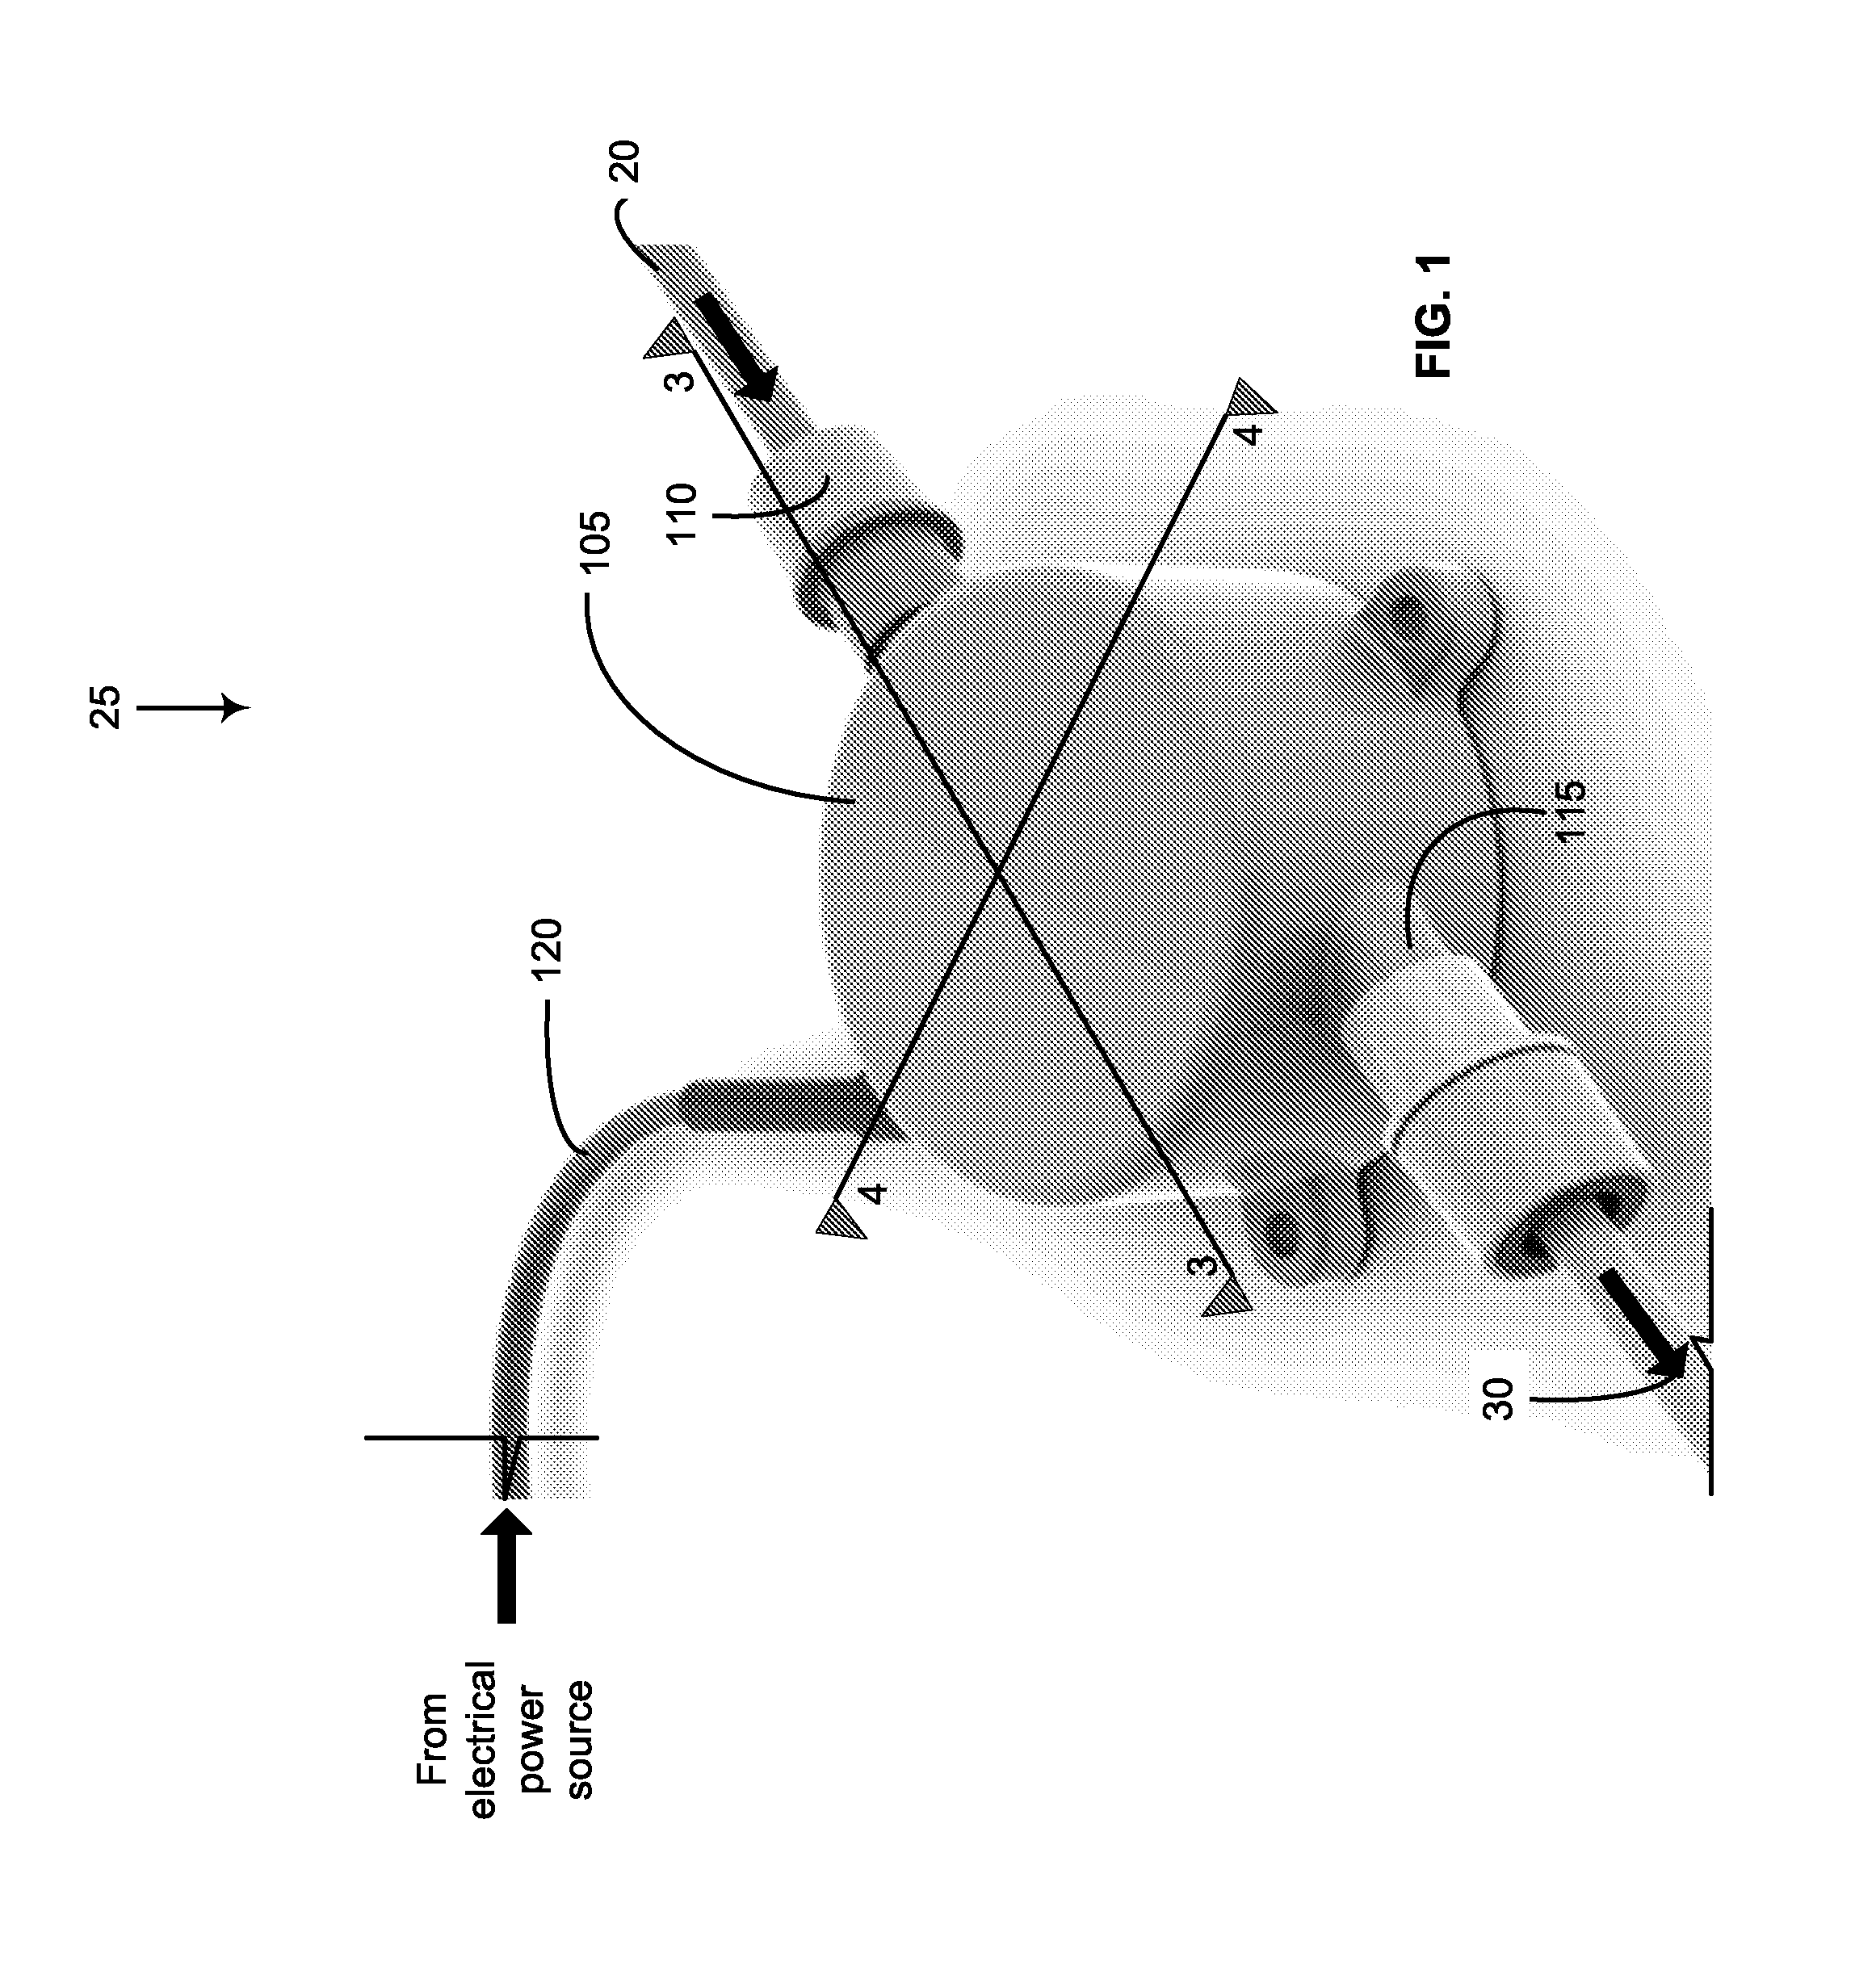 Blood pump systems and methods